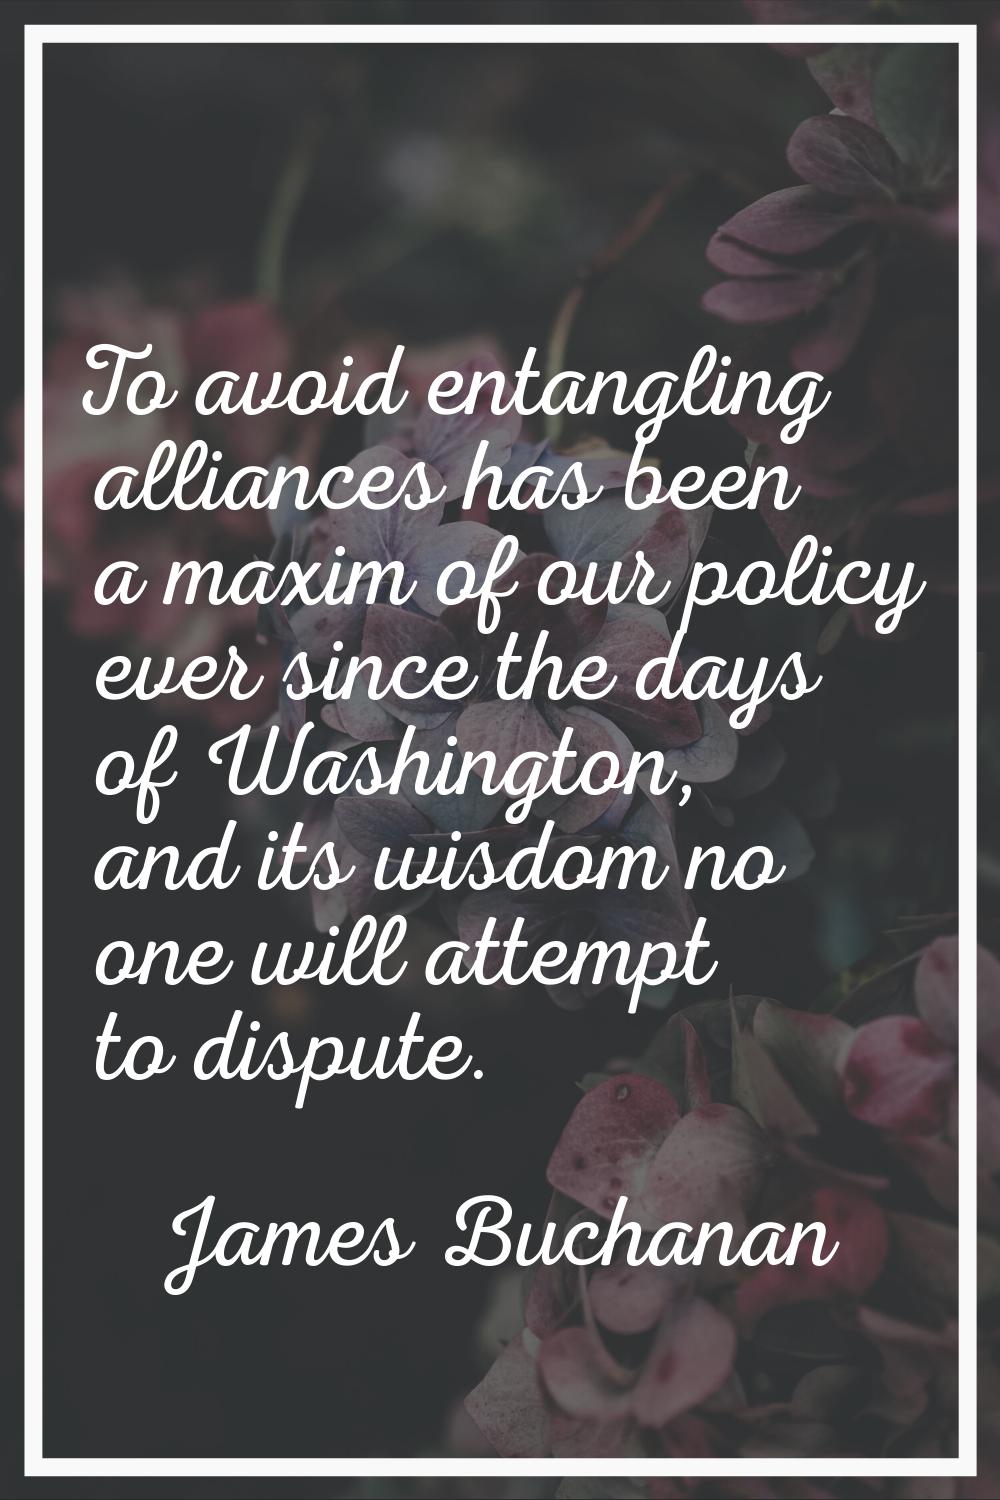 To avoid entangling alliances has been a maxim of our policy ever since the days of Washington, and